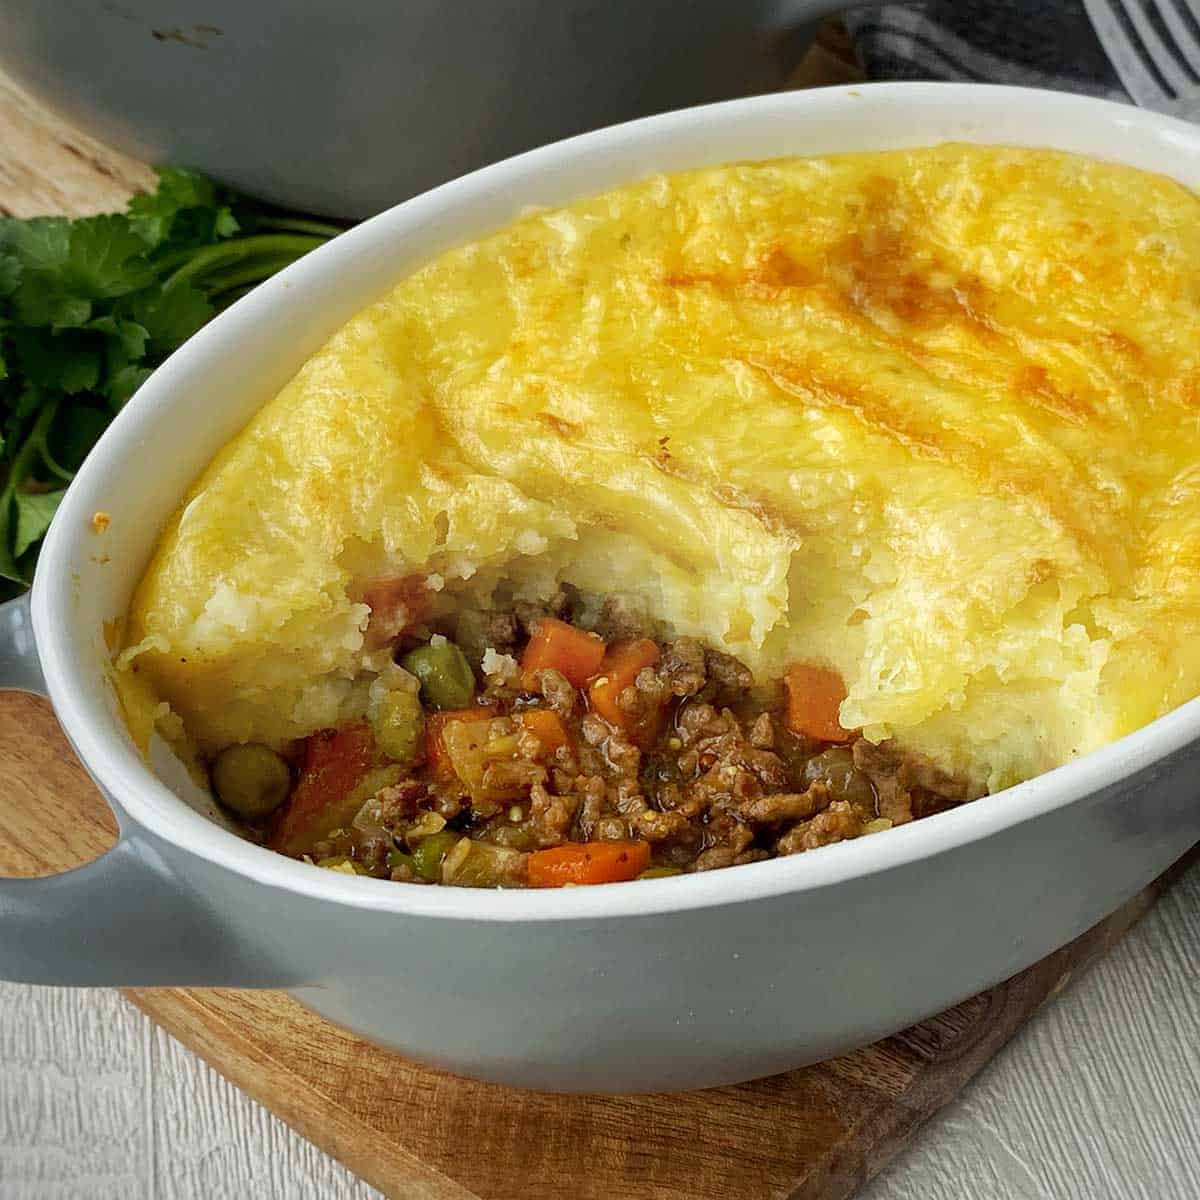 A close up of a beef cottage pie with a corner that has been served up already.